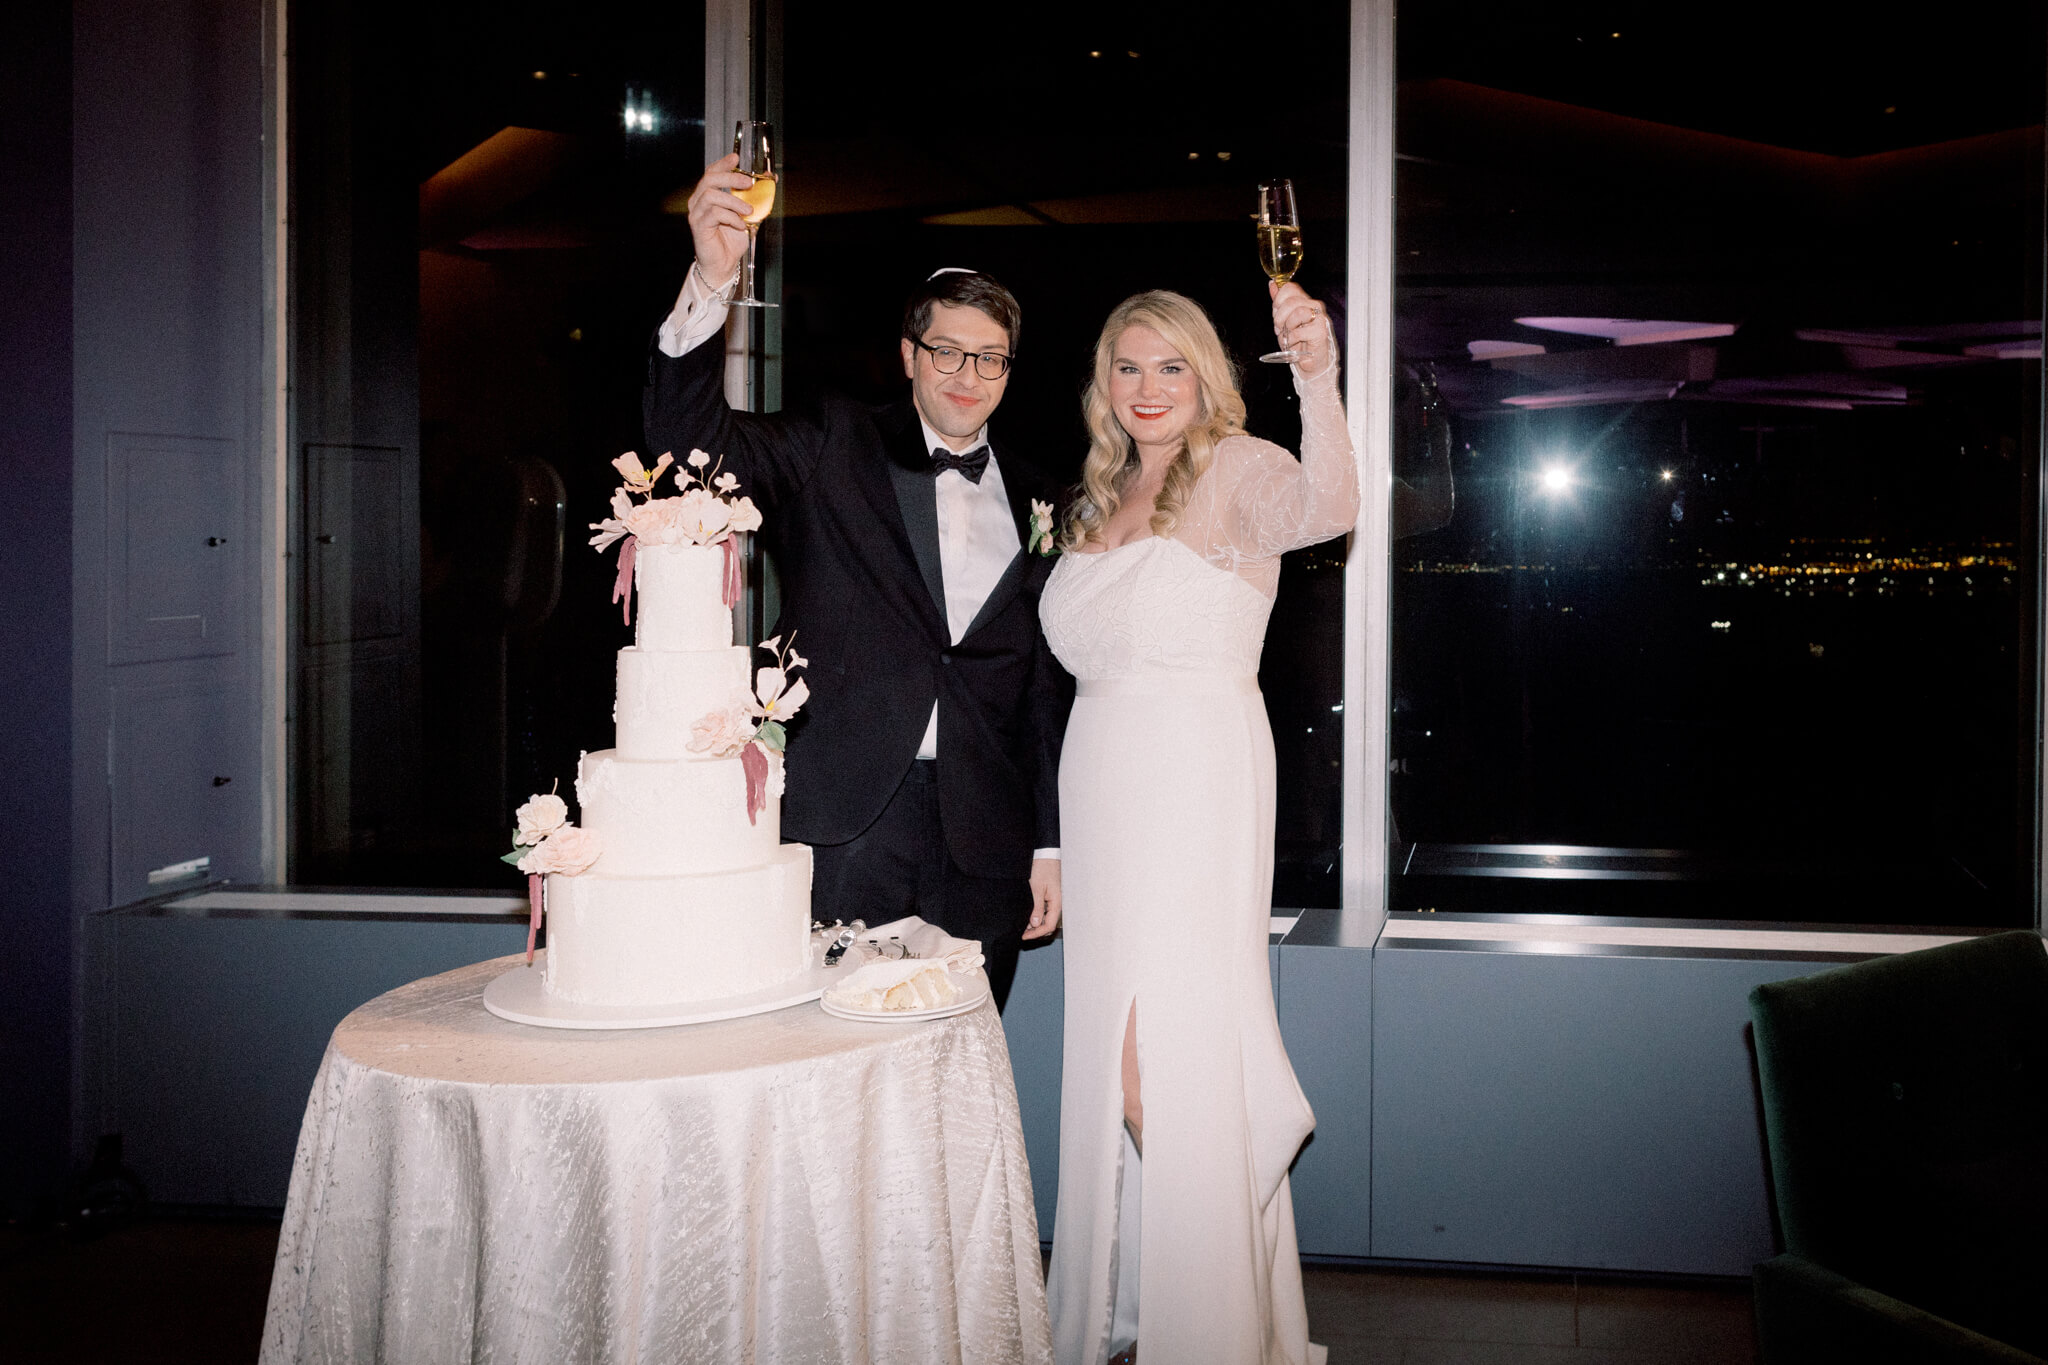 The bride and groom are holding their champagne glasses up in the air, with the wedding cake in front of them at Manhatta Restaurant, New York. Image by Jenny Fu Studio